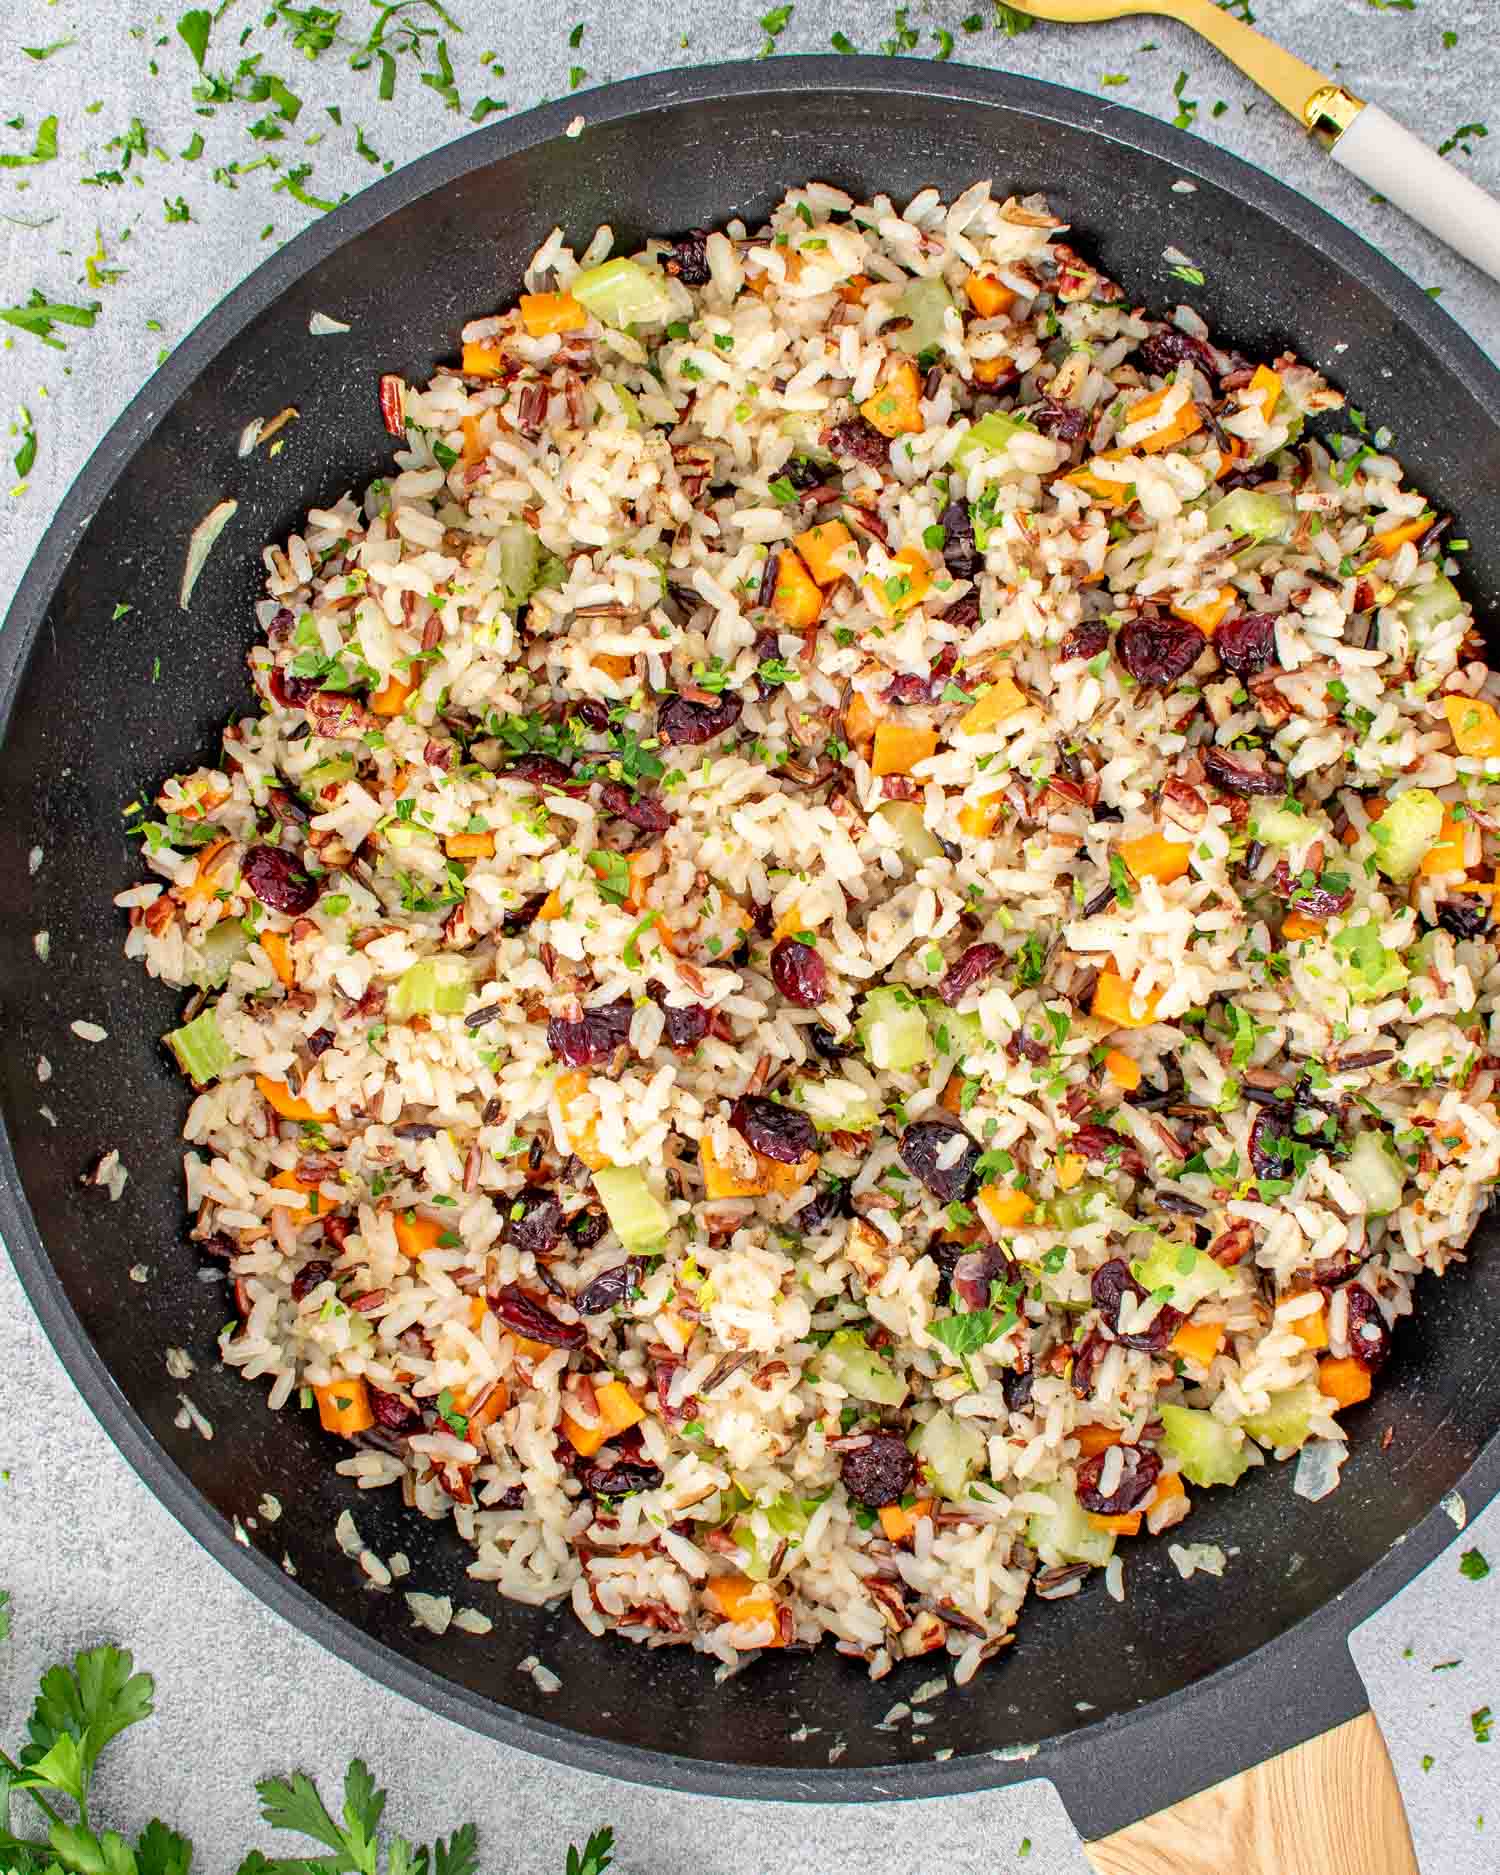 freshly made wild rice pilaf in a skillet.